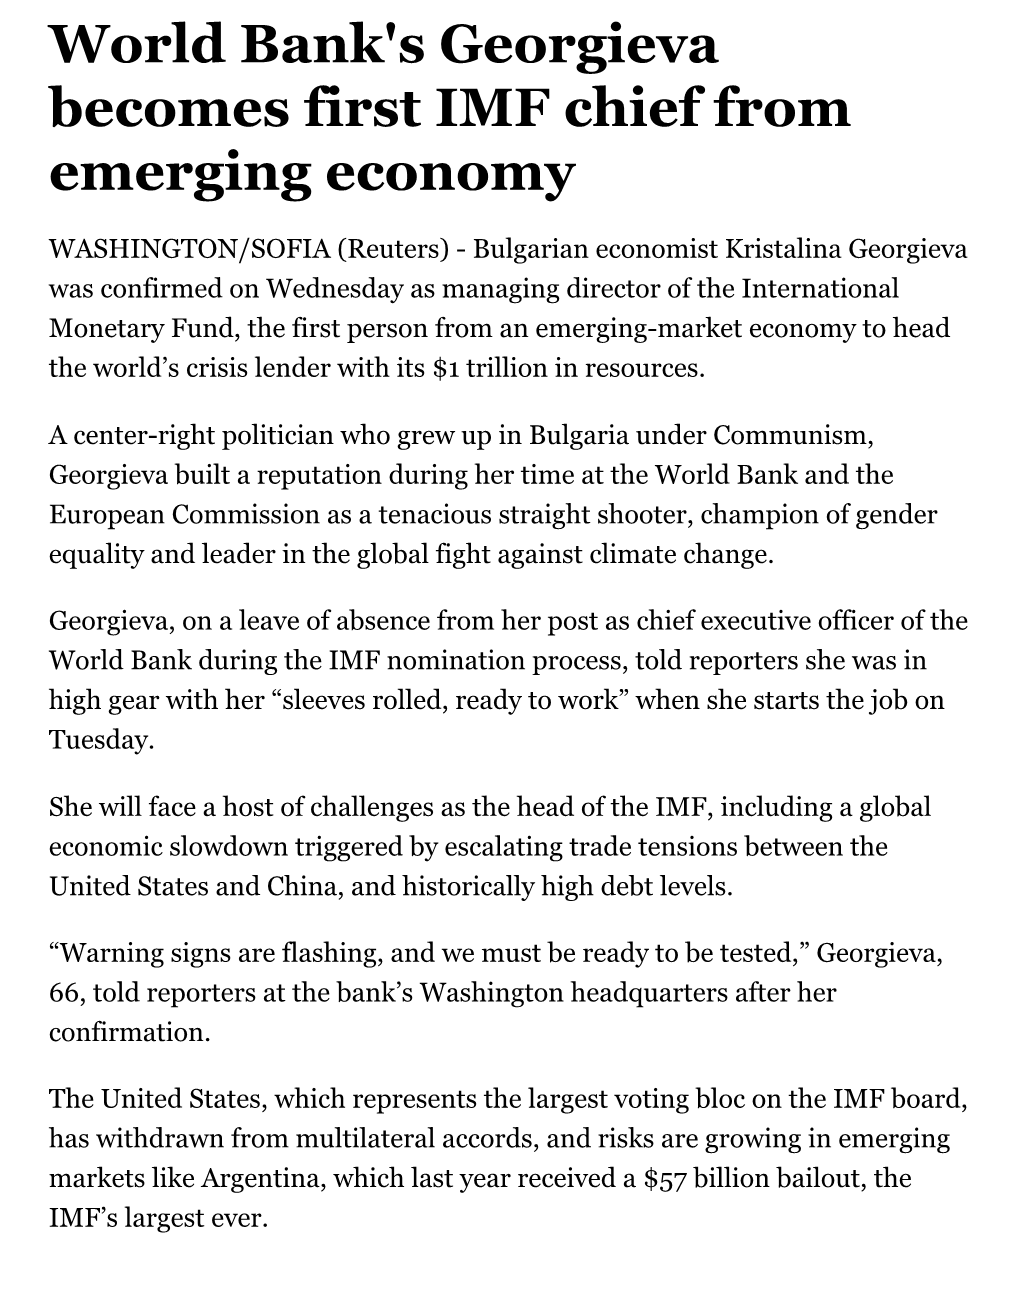 World Bank's Georgieva Becomes First IMF Chief from Emerging Economy